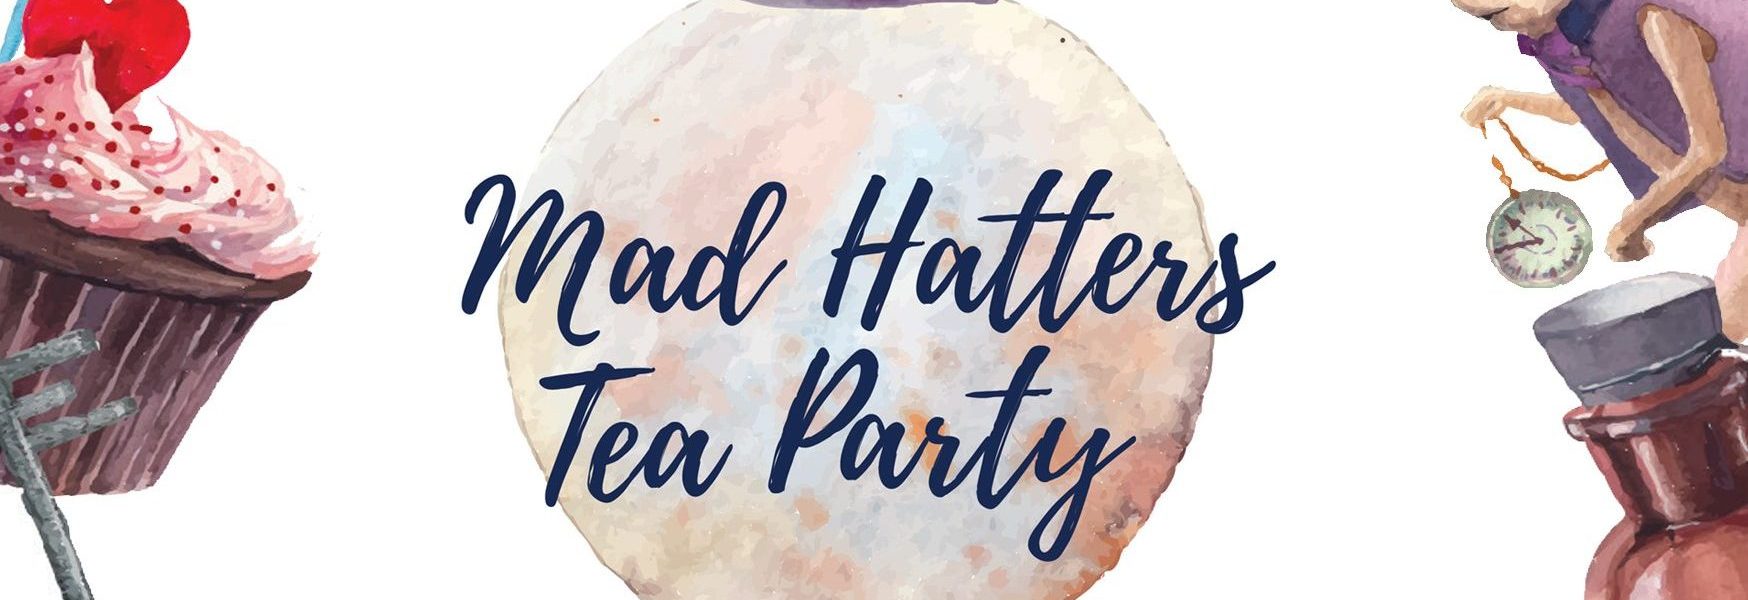 avalon-court-care-home-coventry-mad-hatters-tea-party-28-aug-1bc